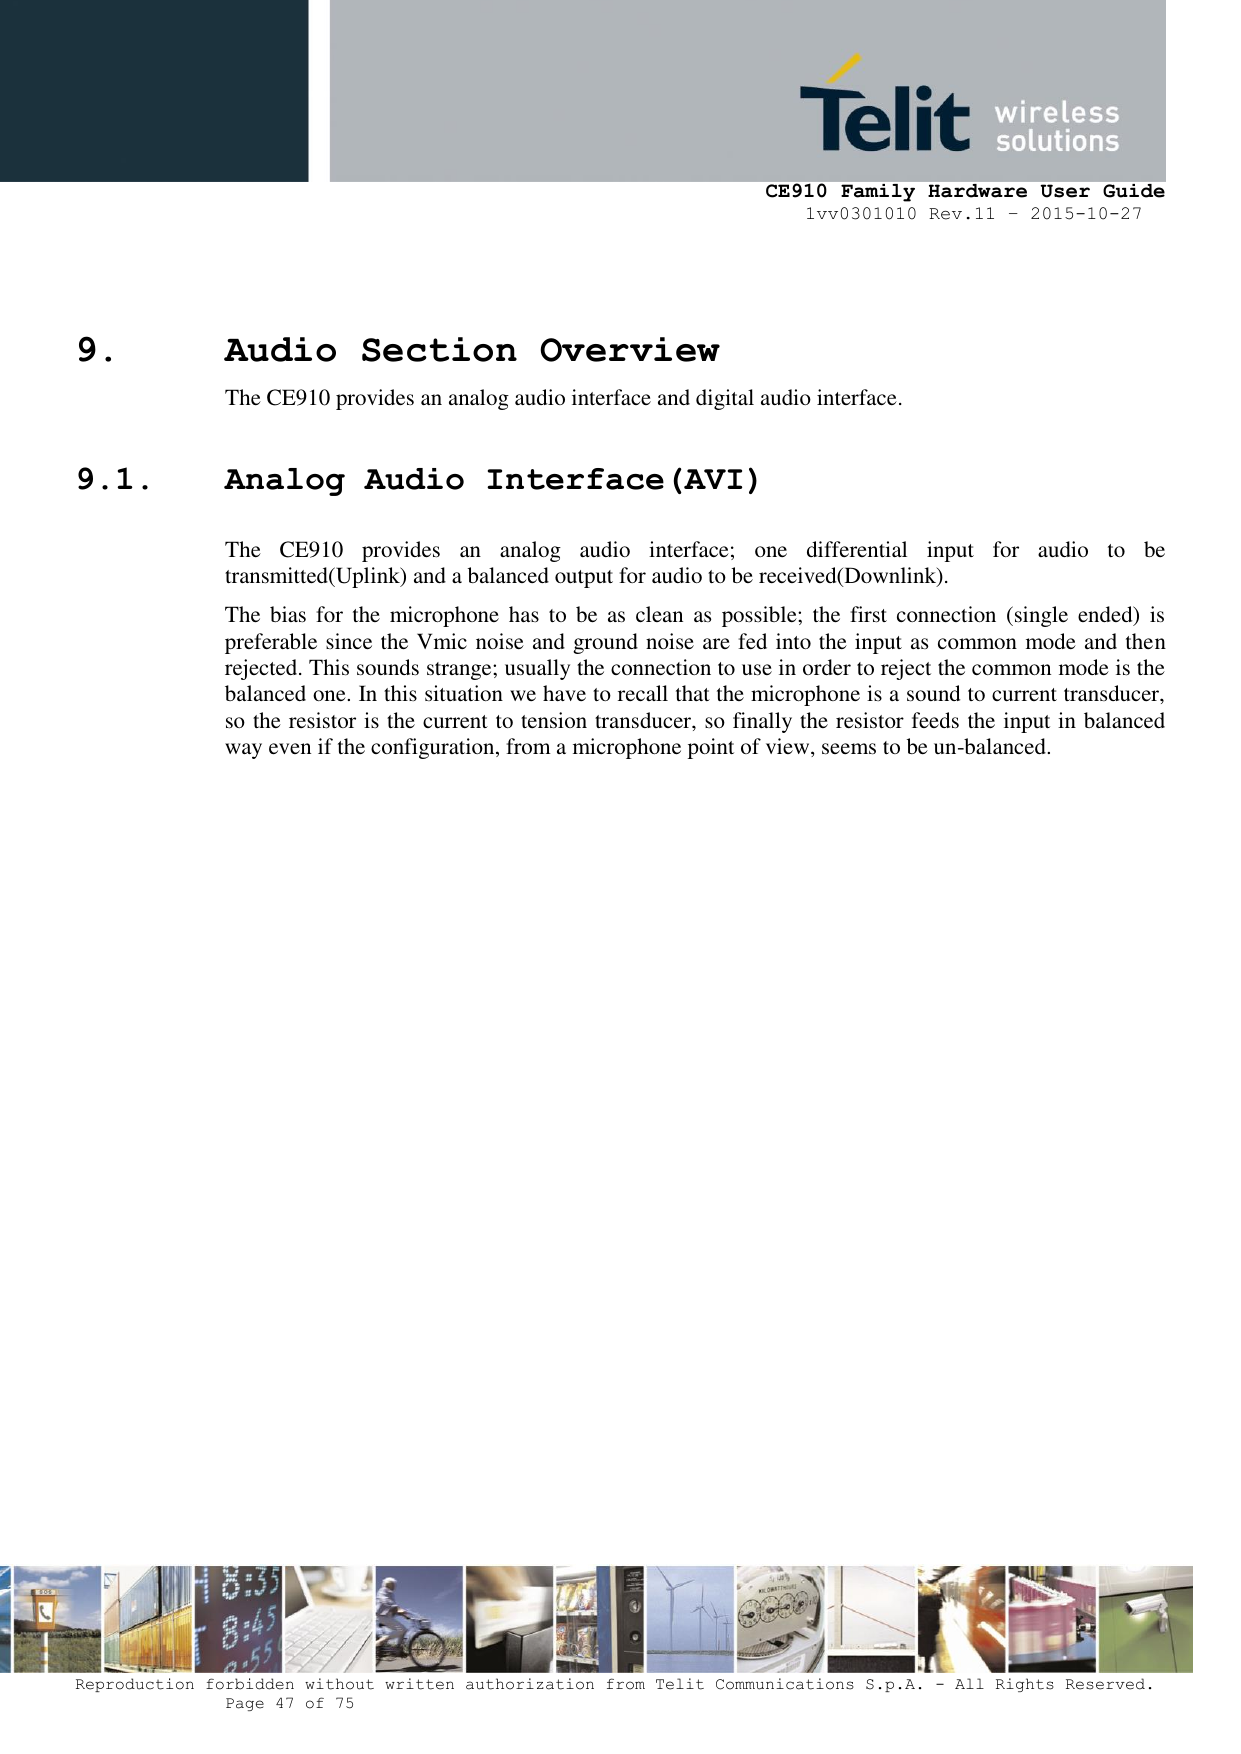     CE910 Family Hardware User Guide 1vv0301010 Rev.11 – 2015-10-27 Reproduction forbidden without written authorization from Telit Communications S.p.A. - All Rights Reserved.    Page 47 of 75                                                     9. Audio Section Overview  The CE910 provides an analog audio interface and digital audio interface. 9.1. Analog Audio Interface(AVI) The  CE910  provides  an  analog  audio  interface;  one  differential  input  for  audio  to  be transmitted(Uplink) and a balanced output for audio to be received(Downlink). The  bias  for  the  microphone has  to  be  as  clean  as  possible; the  first  connection (single  ended)  is preferable since the Vmic noise and ground noise are fed into the input as common mode and then rejected. This sounds strange; usually the connection to use in order to reject the common mode is the balanced one. In this situation we have to recall that the microphone is a sound to current transducer, so the resistor is the current to tension transducer, so finally the resistor feeds the input in balanced way even if the configuration, from a microphone point of view, seems to be un-balanced.                     